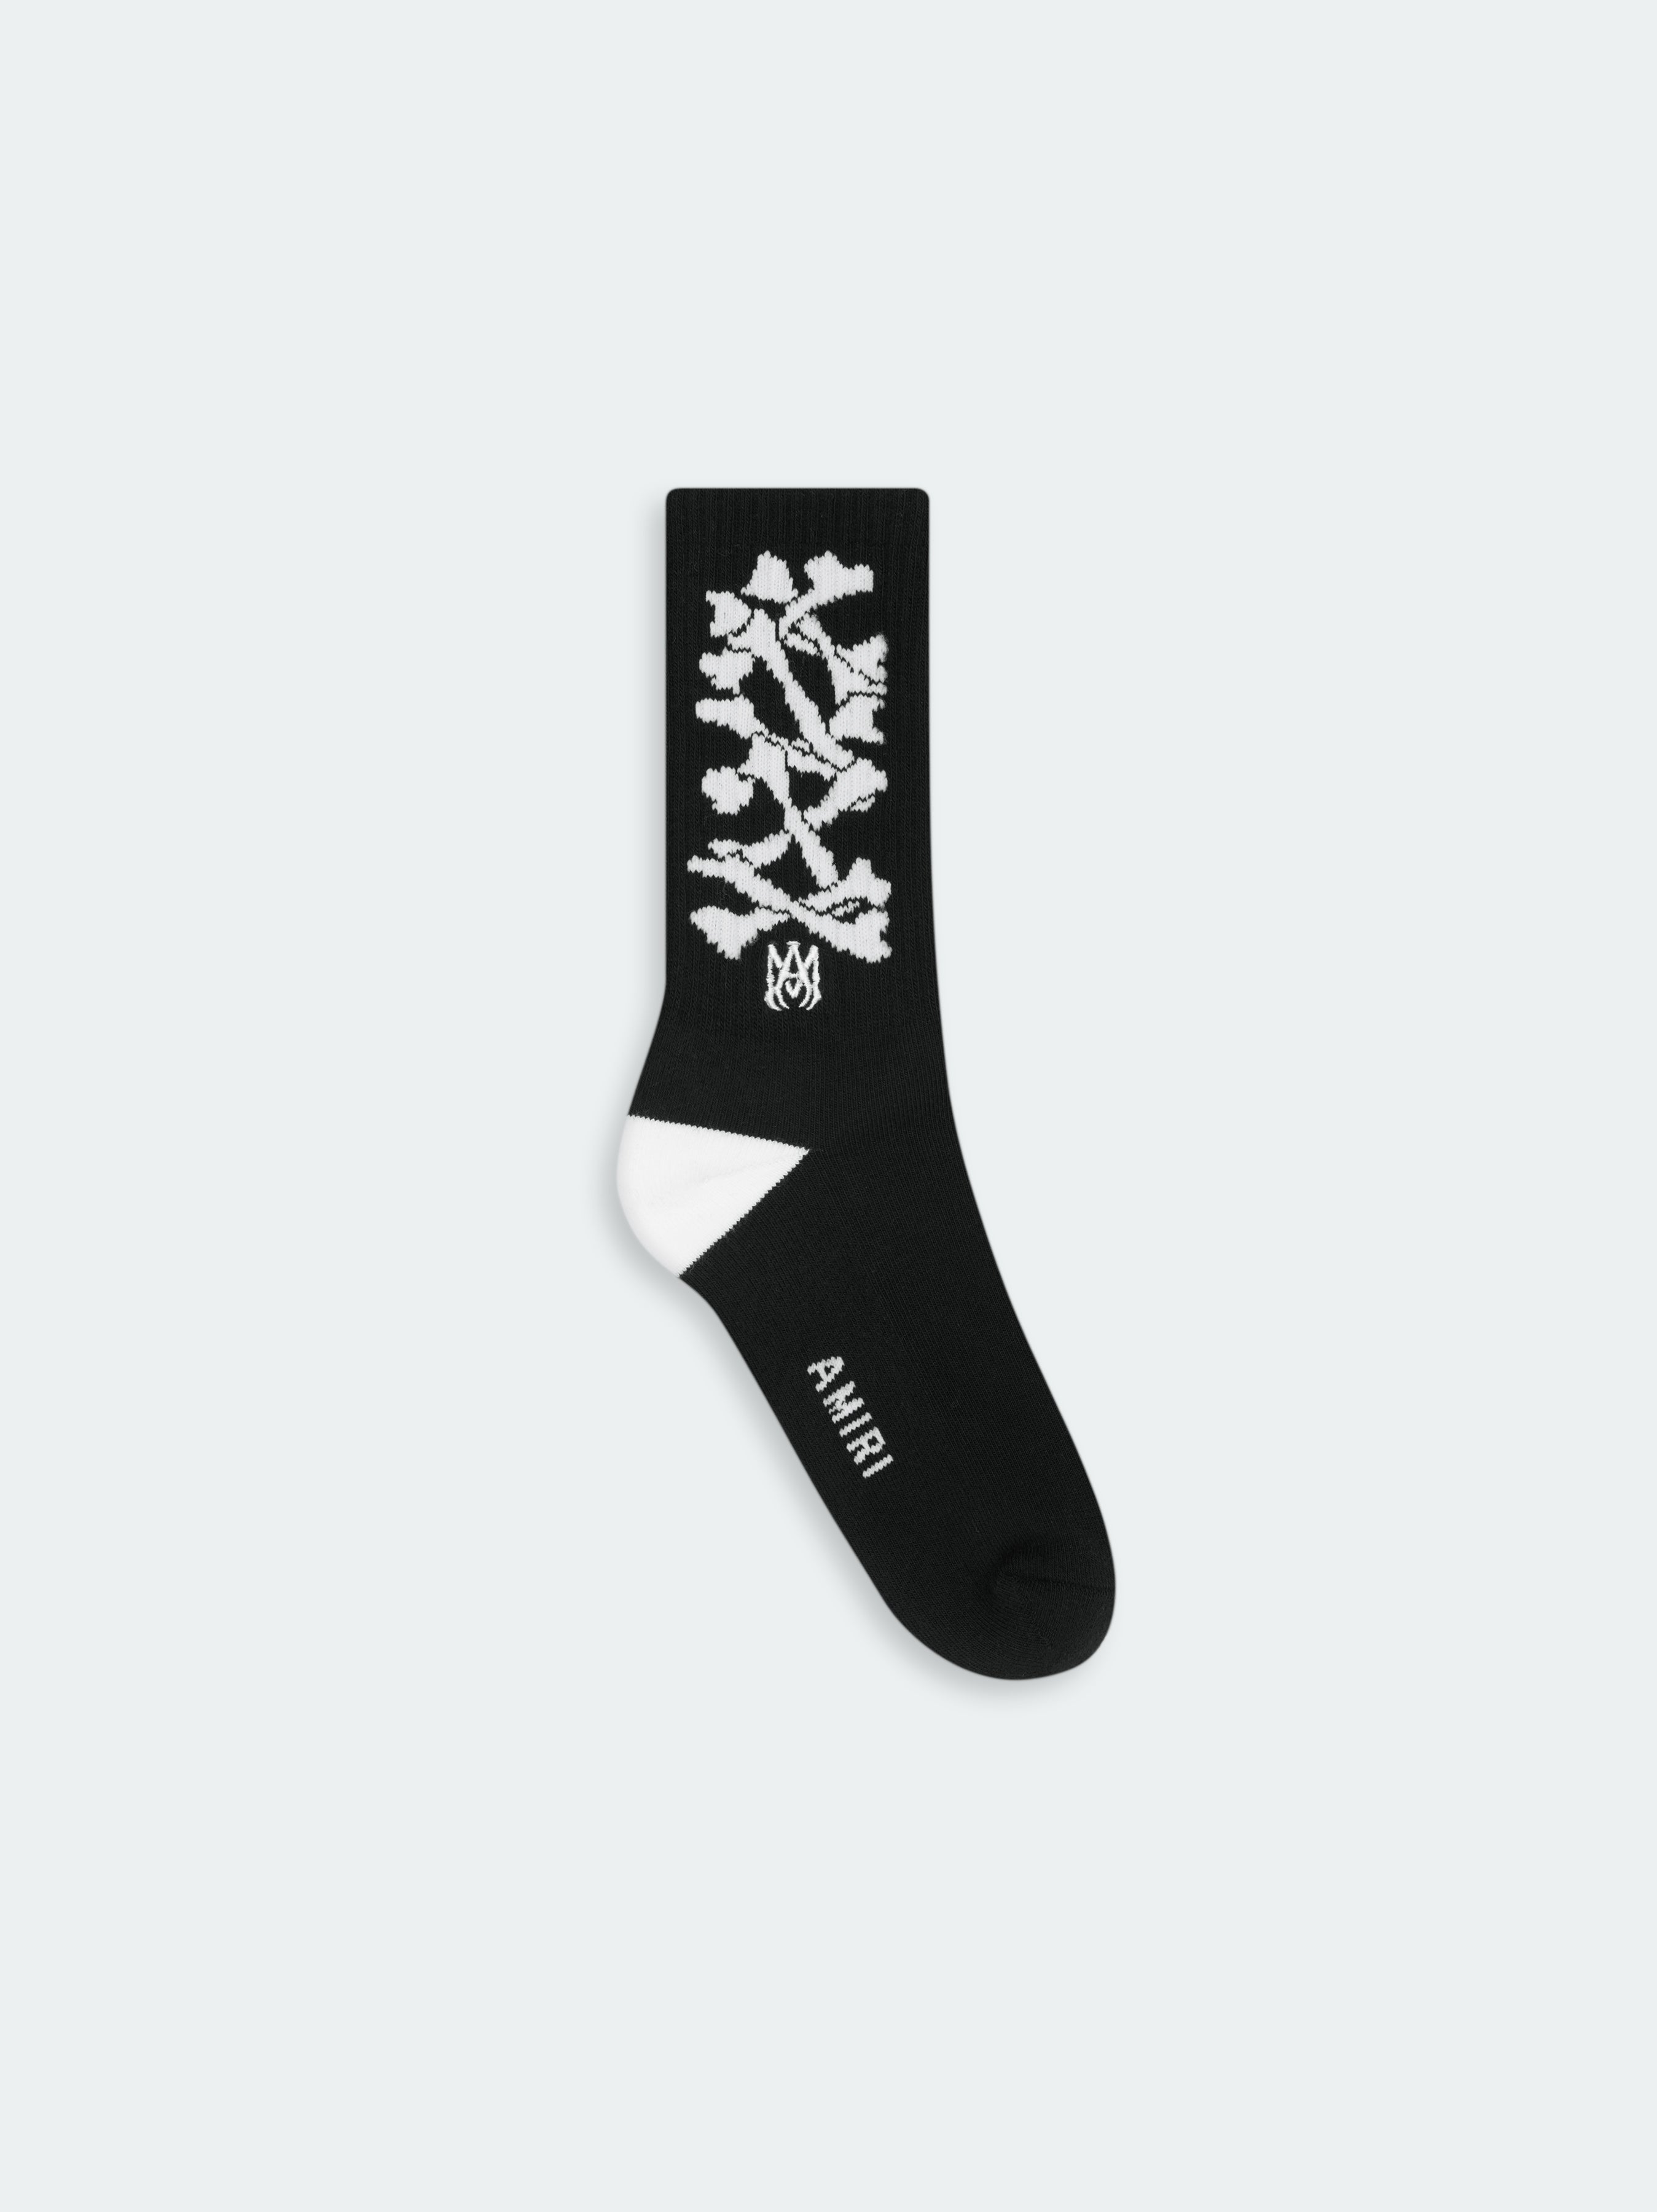 Product KIDS - STACKED BONES SOCK - Black featured image